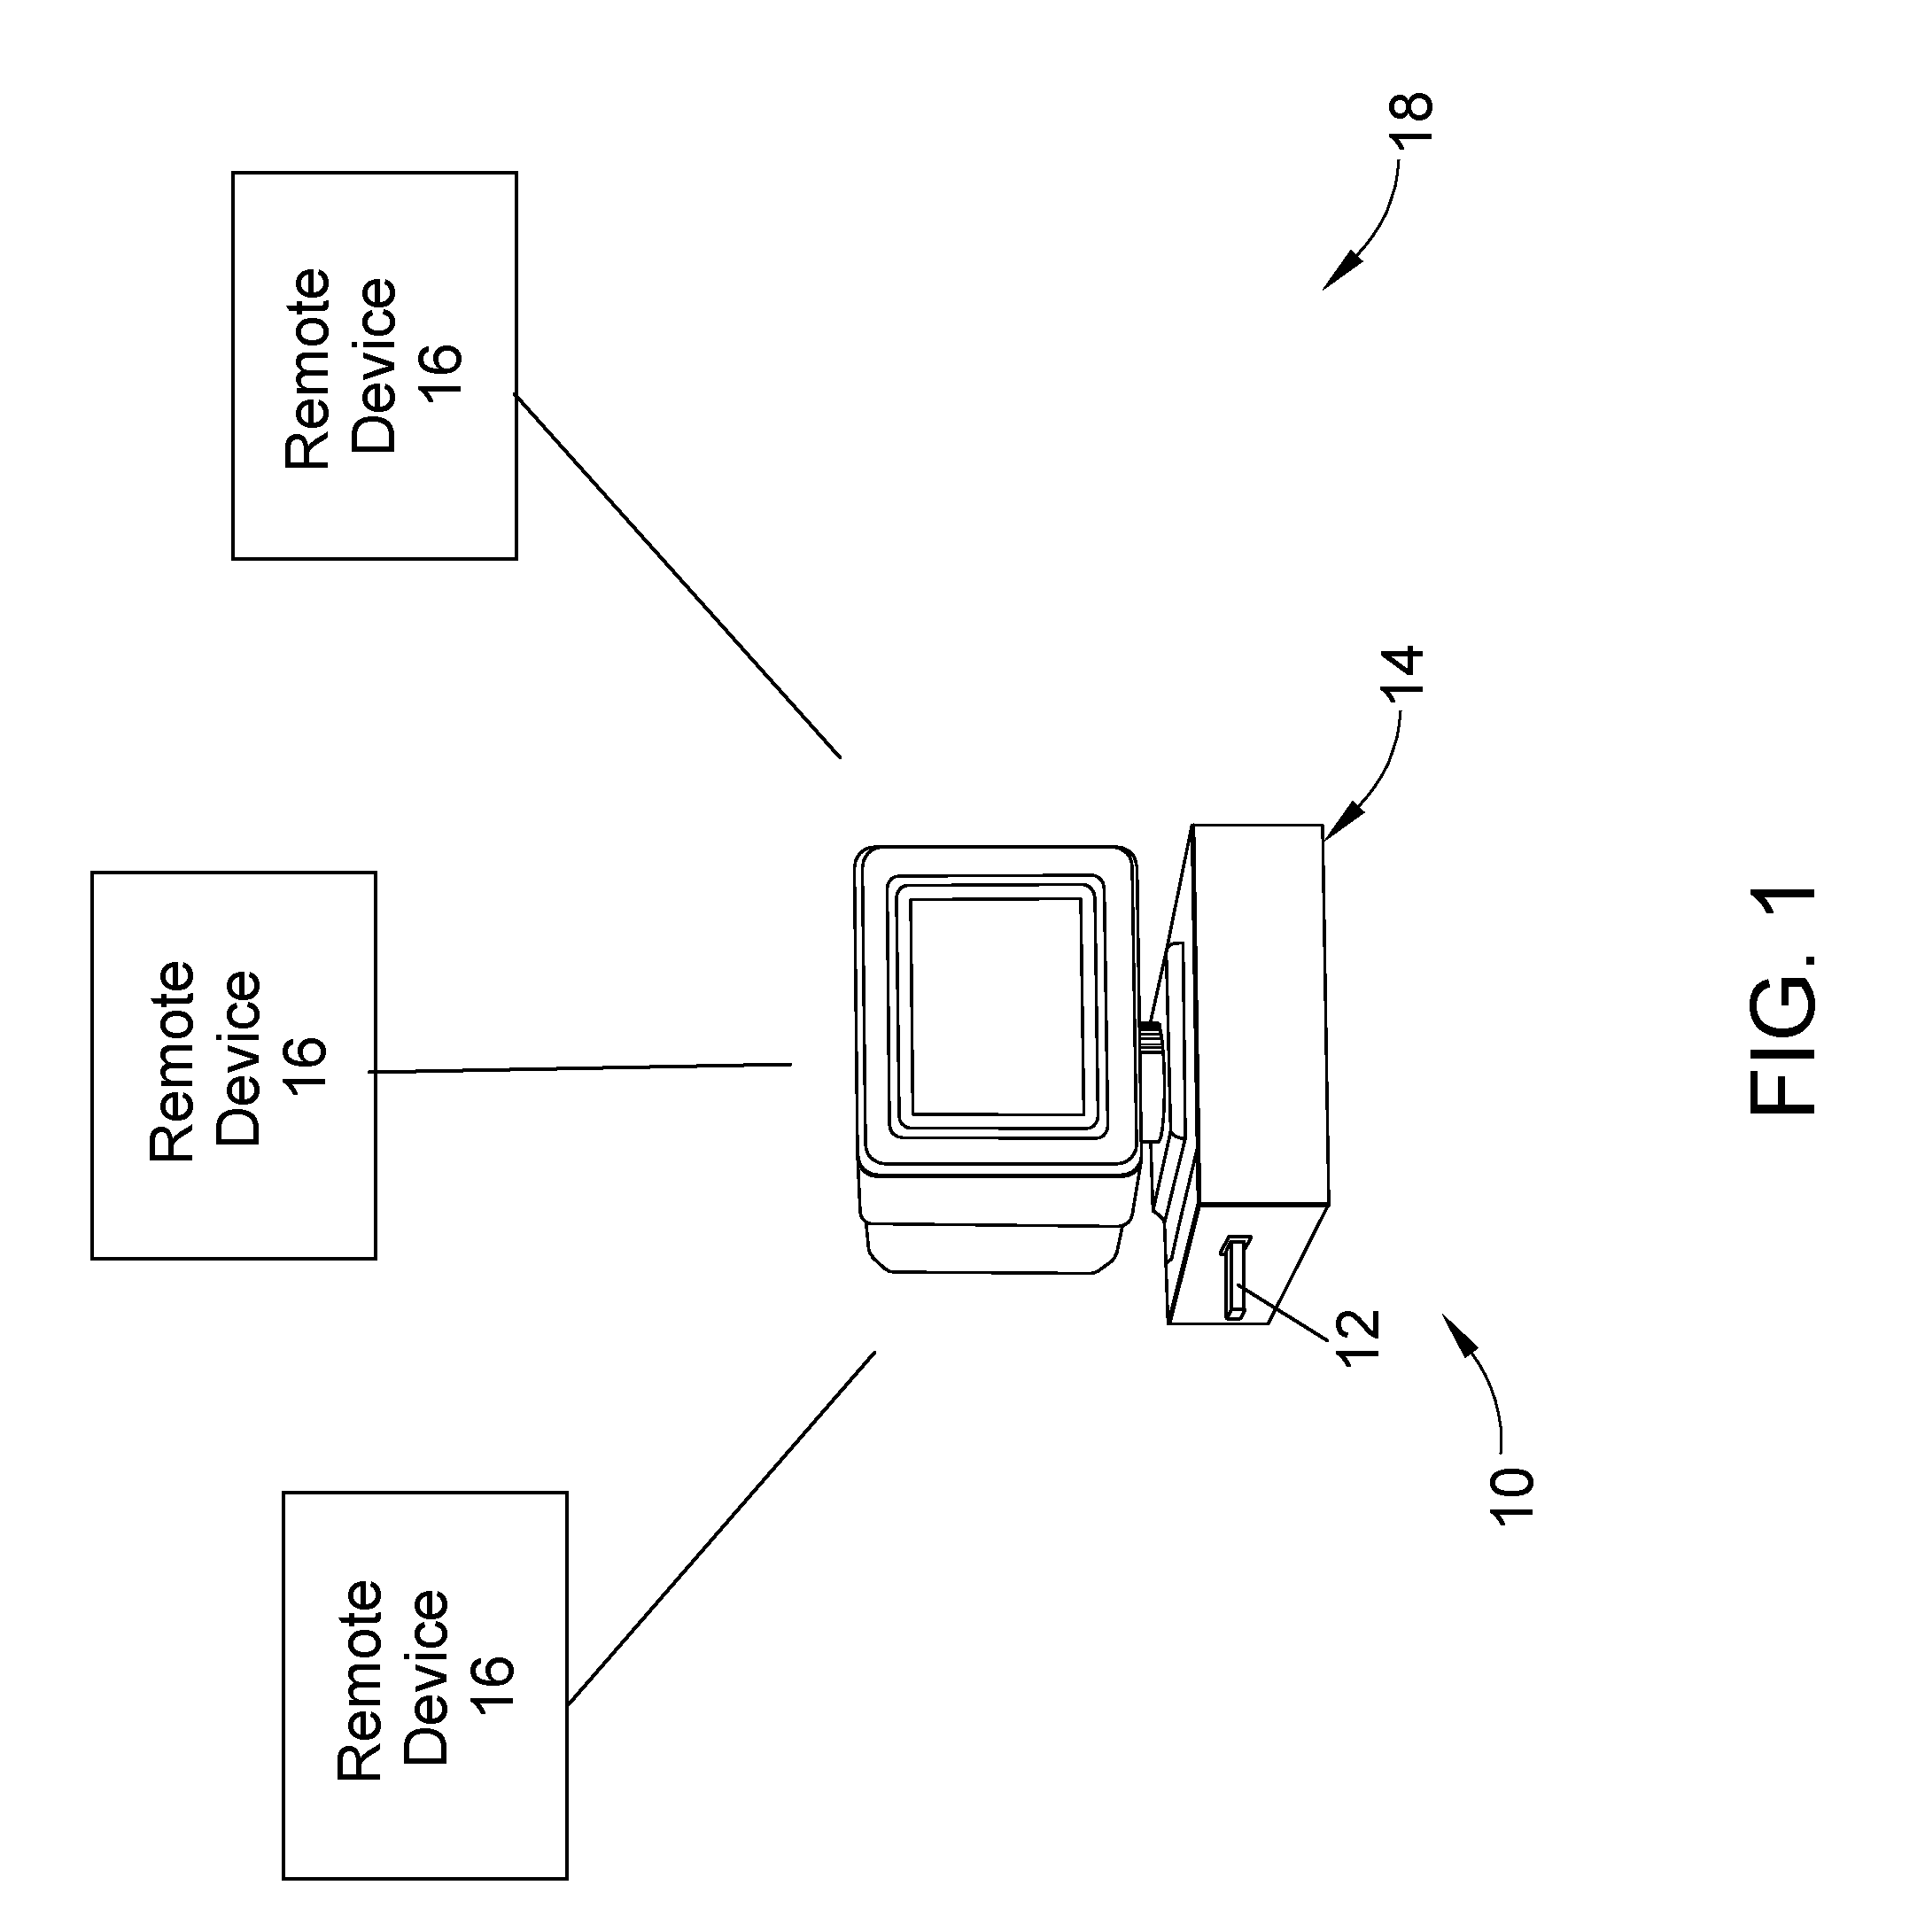 Sensing and analysis system, network, and method